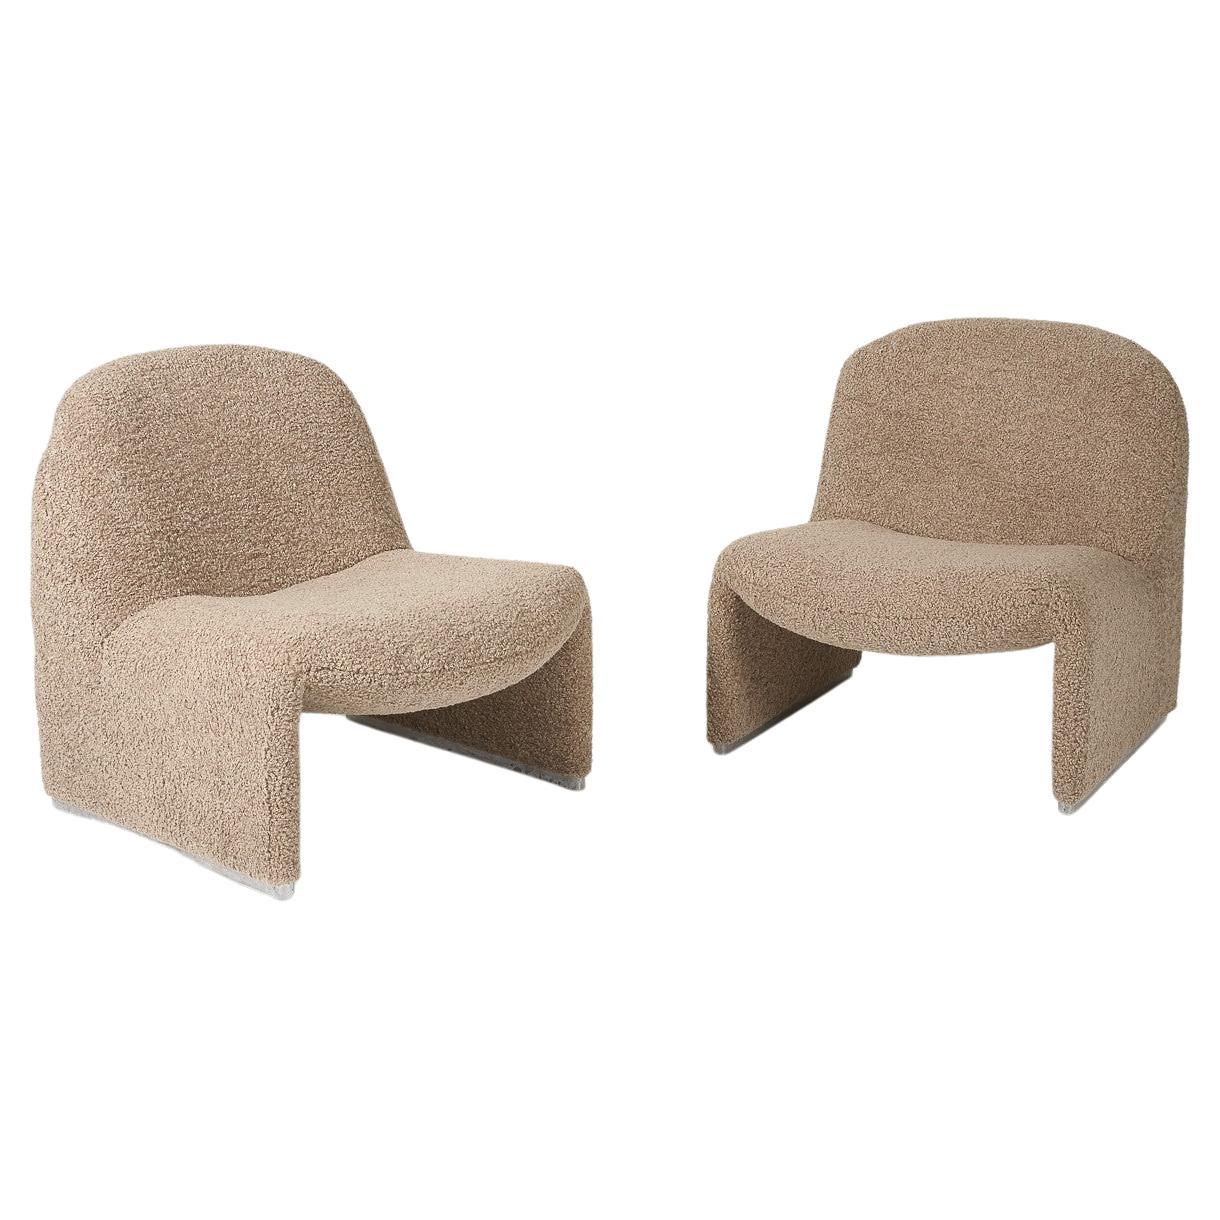 Pair of Alky Armchairs by Giancarlo Piretti for Artifort 1970s